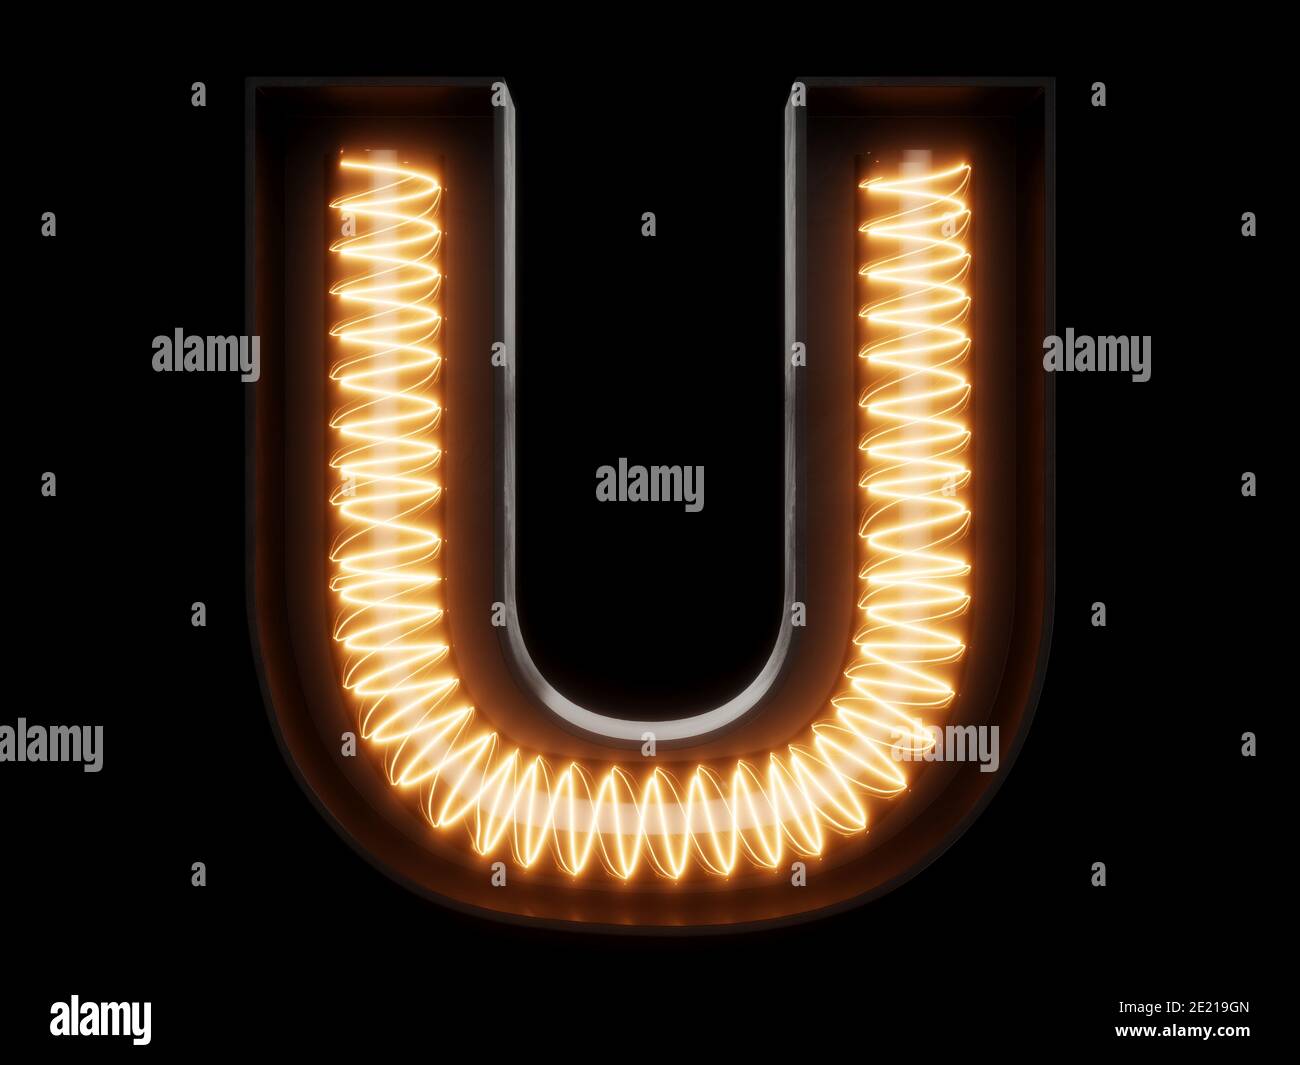 Light bulb glowing letter alphabet character U font. Front view illuminated capital symbol on black background. 3d rendering illustration Stock Photo